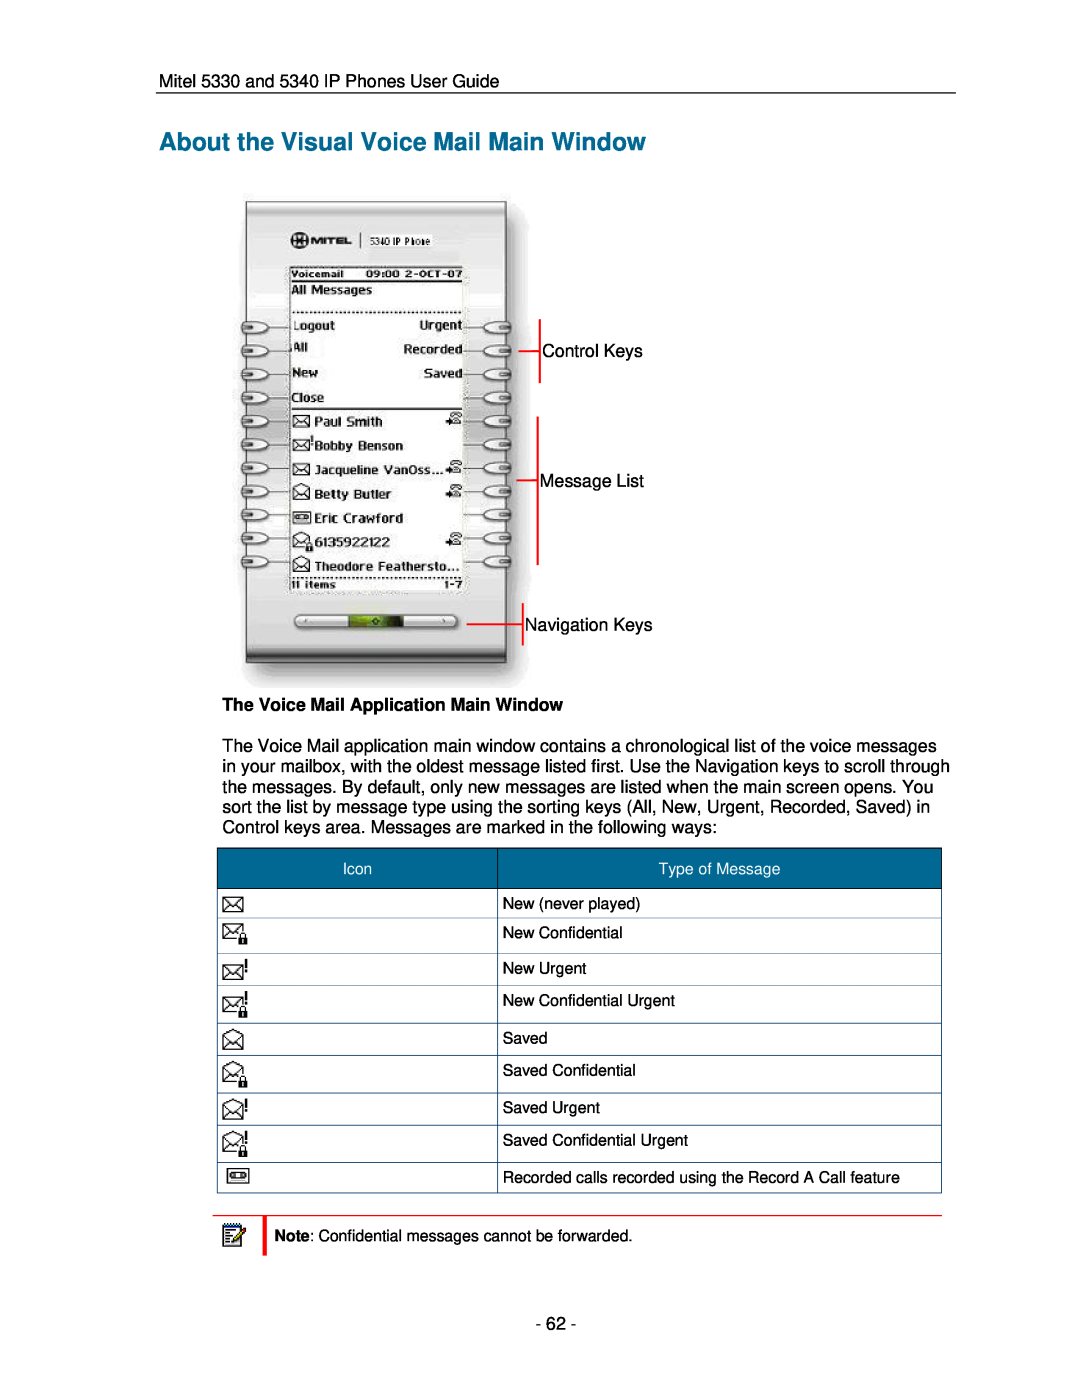 Mitel 5330 manual About the Visual Voice Mail Main Window, The Voice Mail Application Main Window 